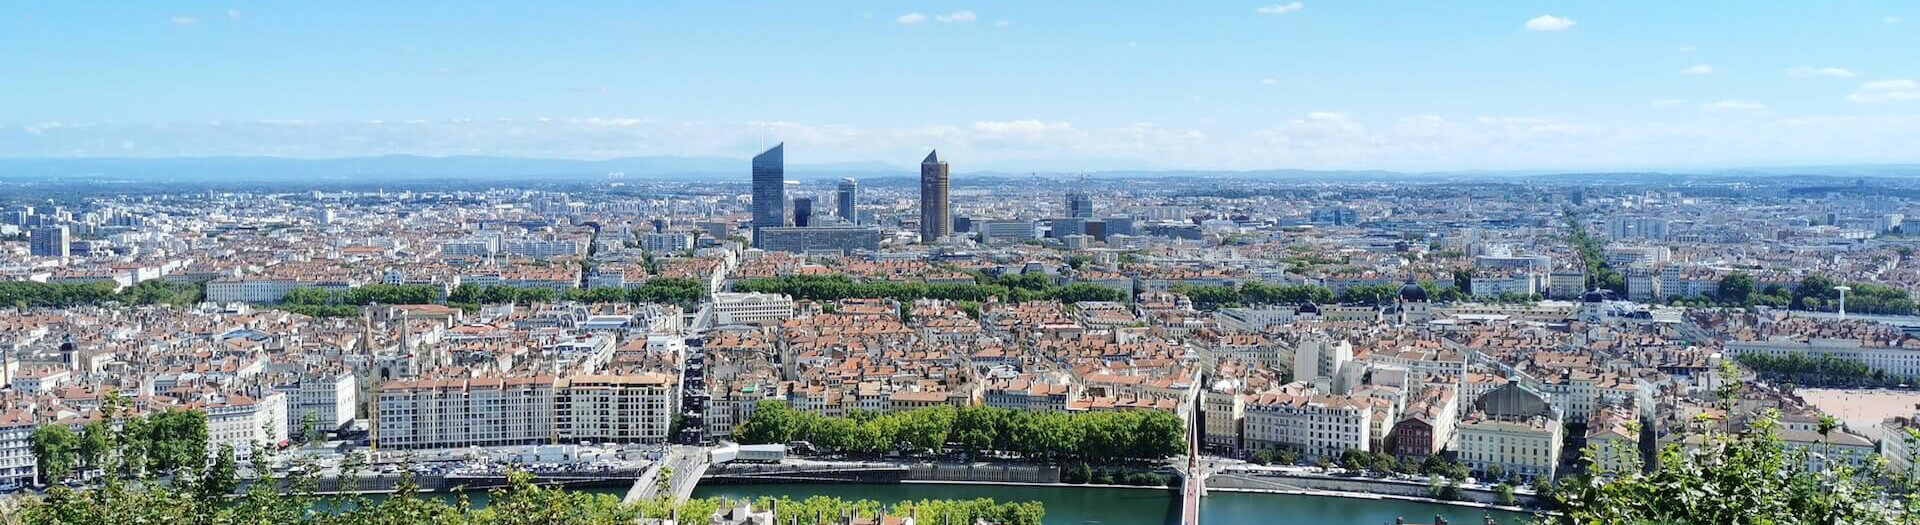 Lyon (France) - view of the city